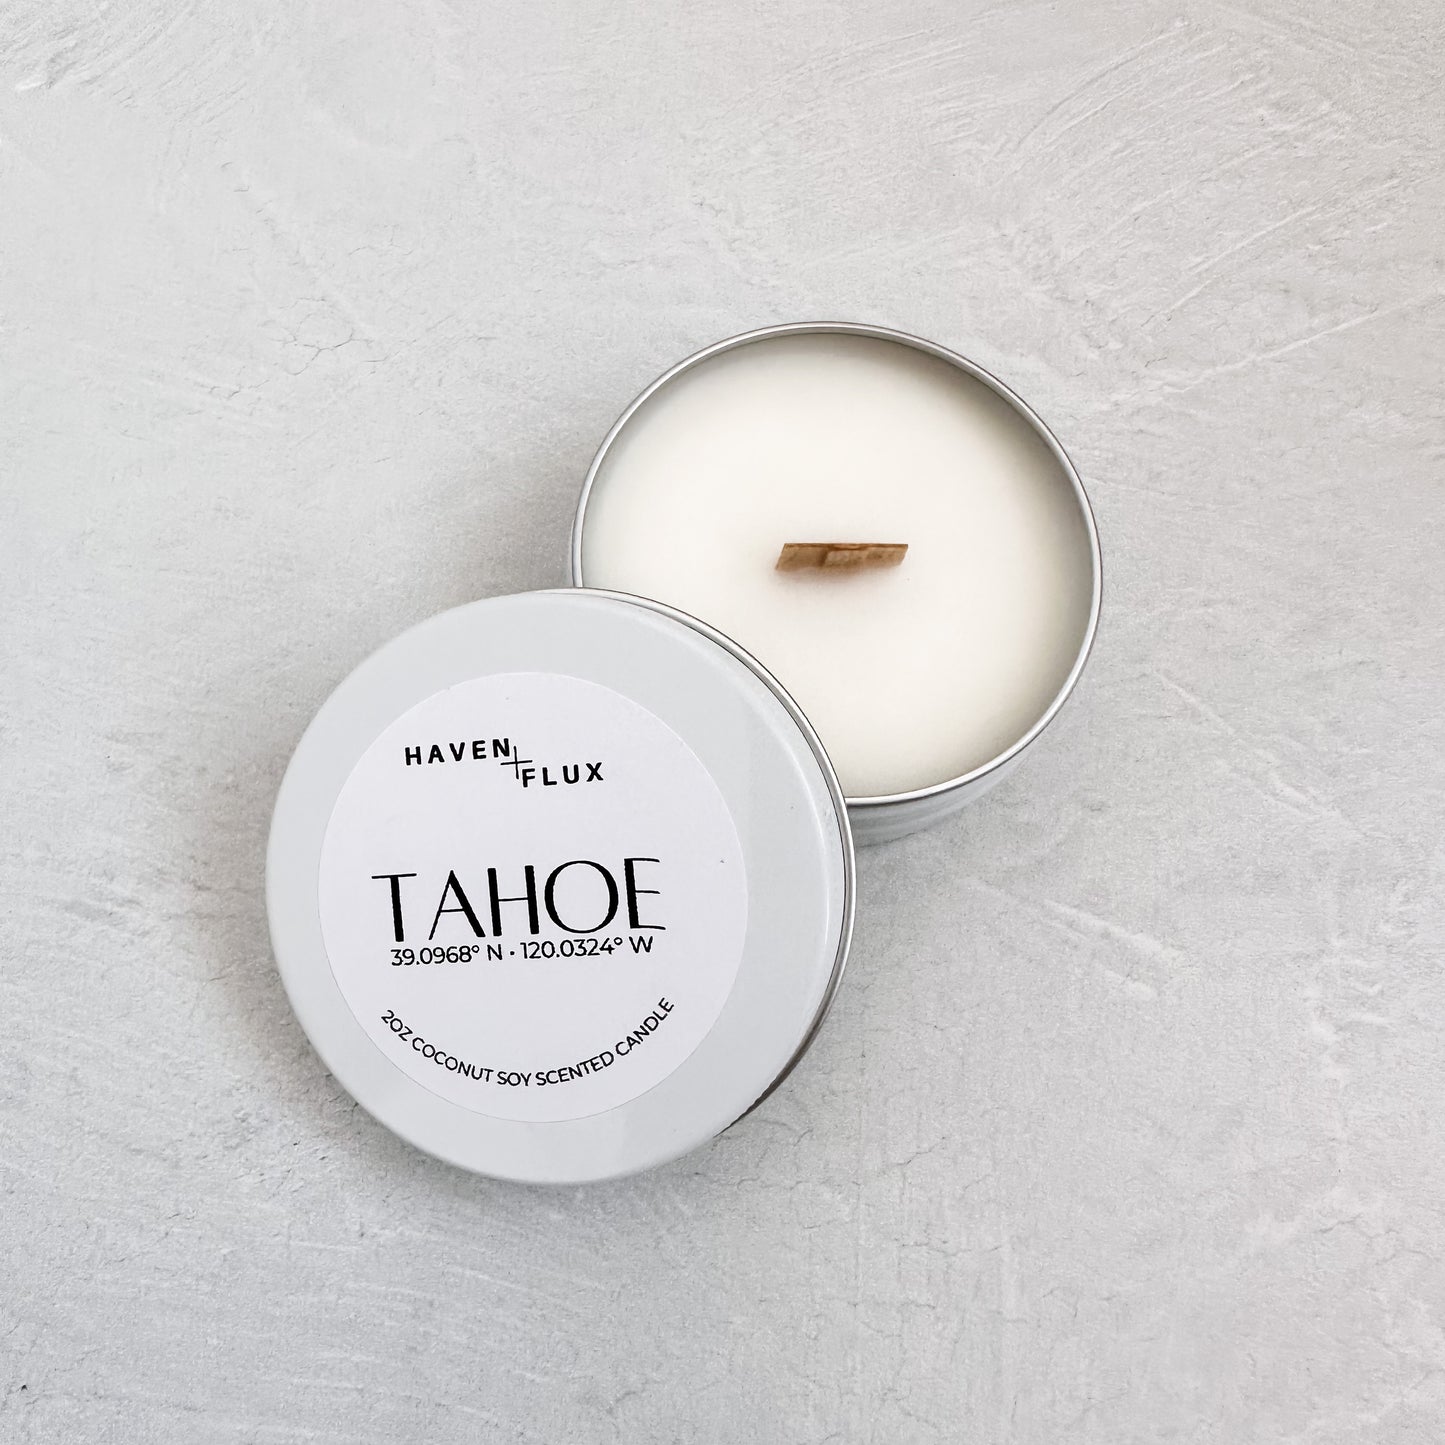 Lake Tahoe Non-Toxic Coconut Soy Wax Wooden Wick Coordinate 2oz Sample Candle for Mental Health